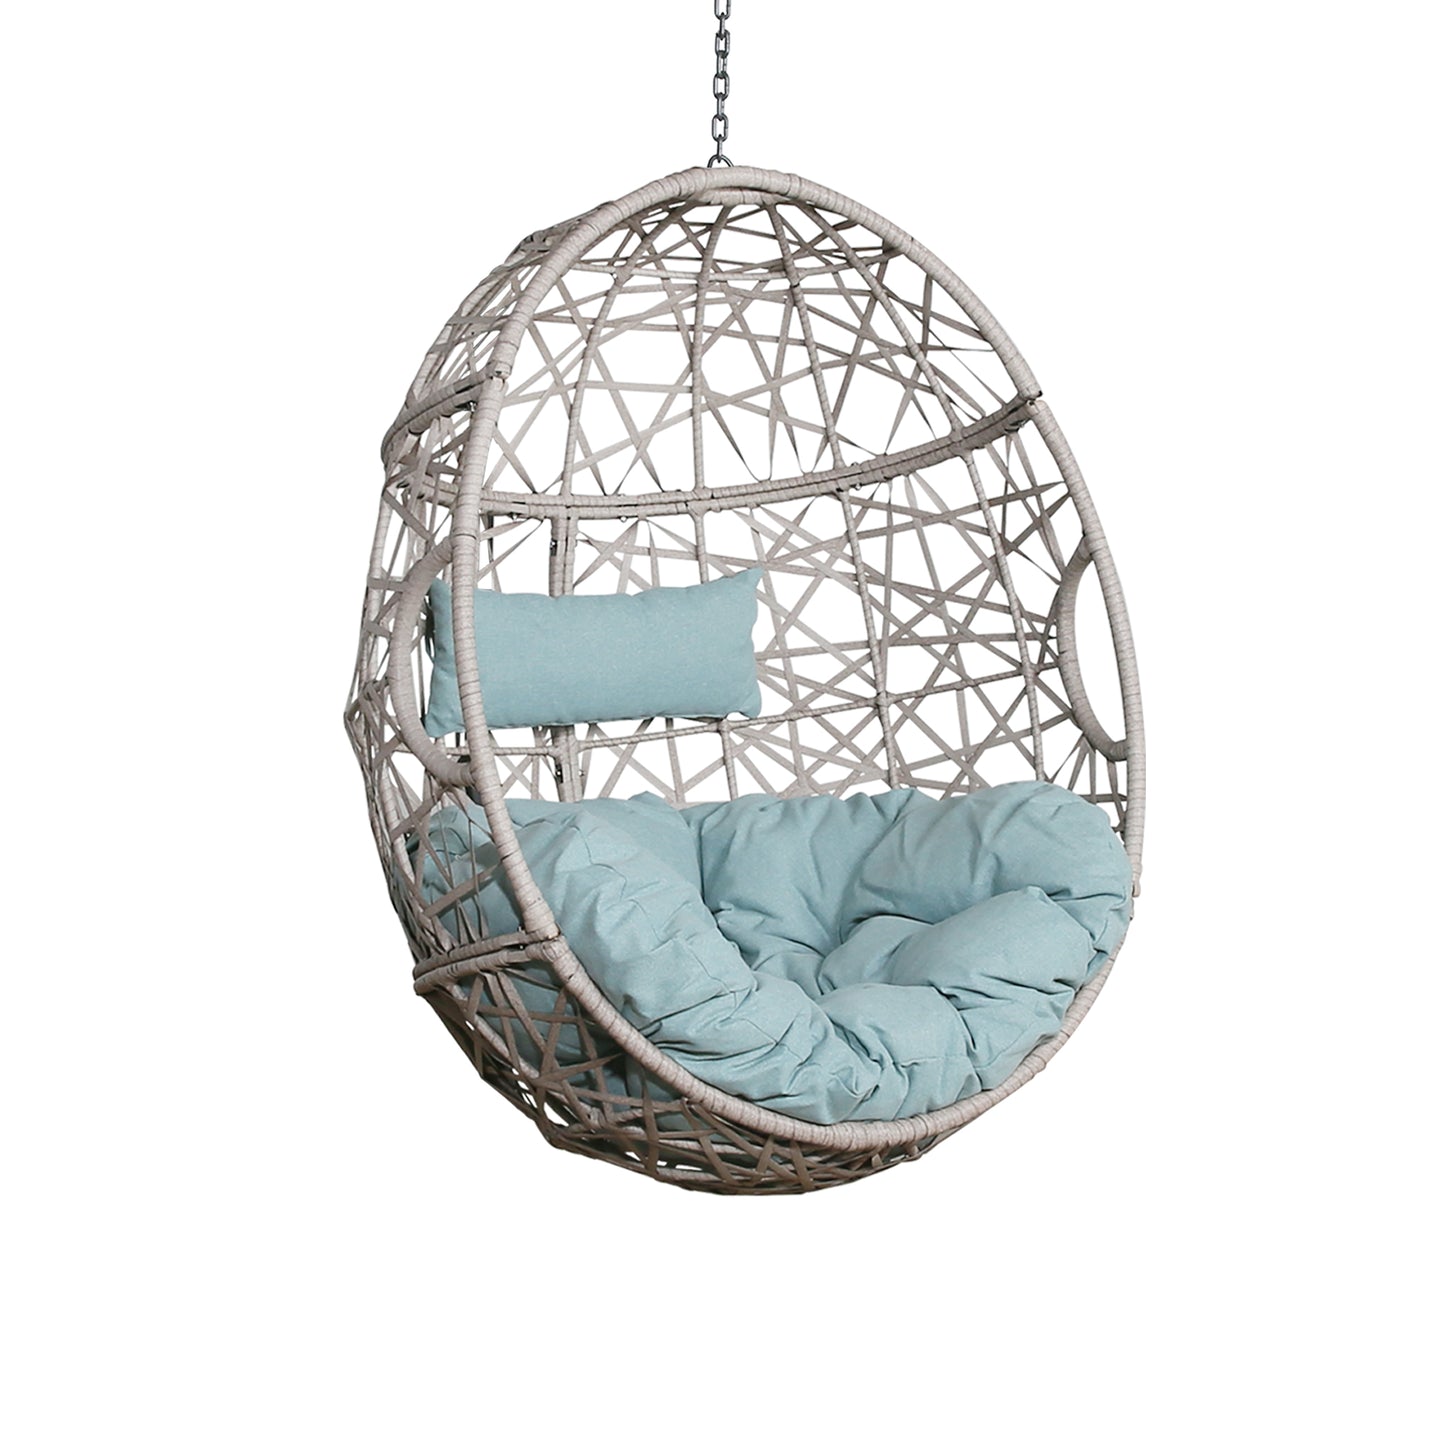 Outdoor Patio Wicker Hanging Basket Swing Chair Tear Drop Egg Chair with Cushion (Blue)